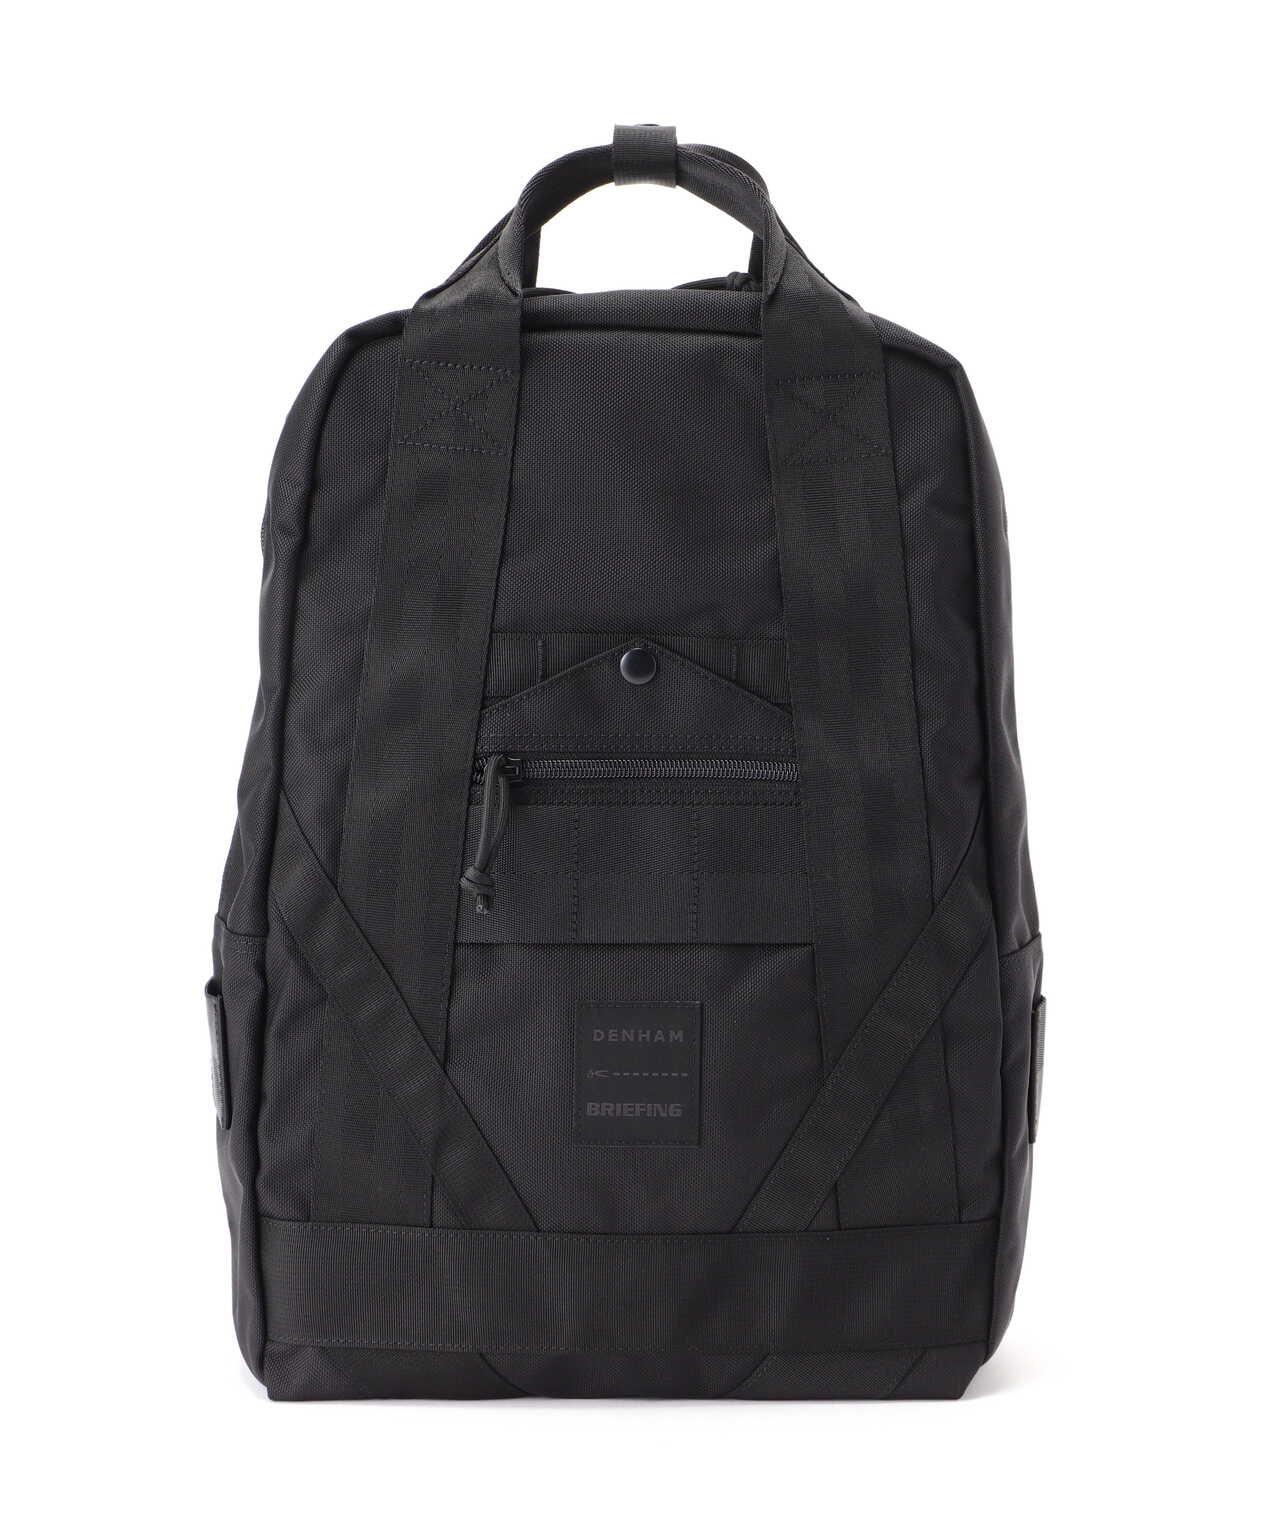 DENHAM×BRIEFING/デンハム×ブリーフィング/7POINT BACKPACK AIR